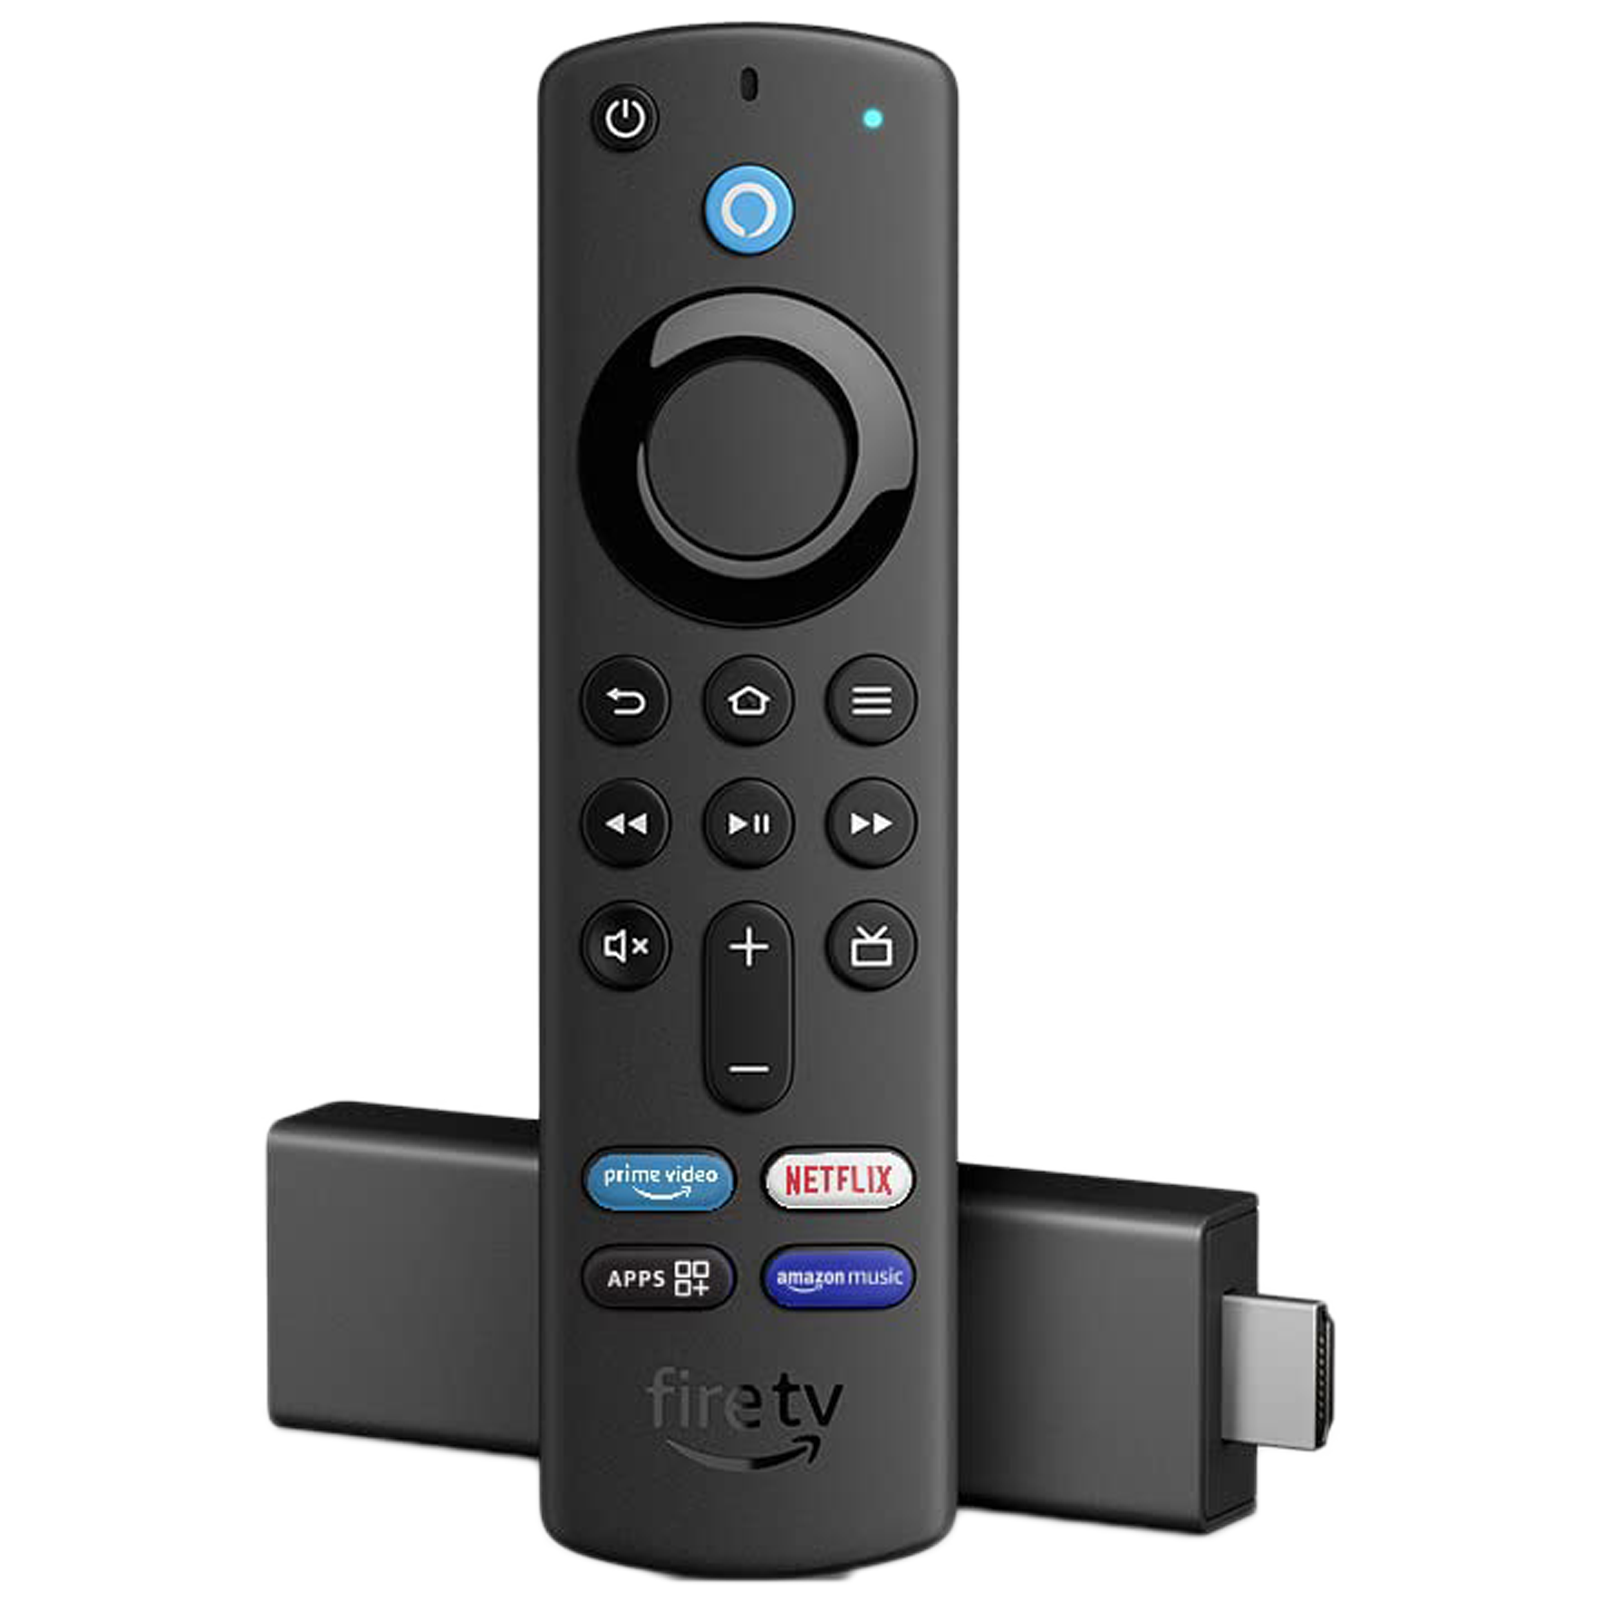 Amazon Fire TV Stick 4K with Alexa Voice Remote 3rd Gen (Dolby Vision and Atmos Support, B08XVZRR21, Black)